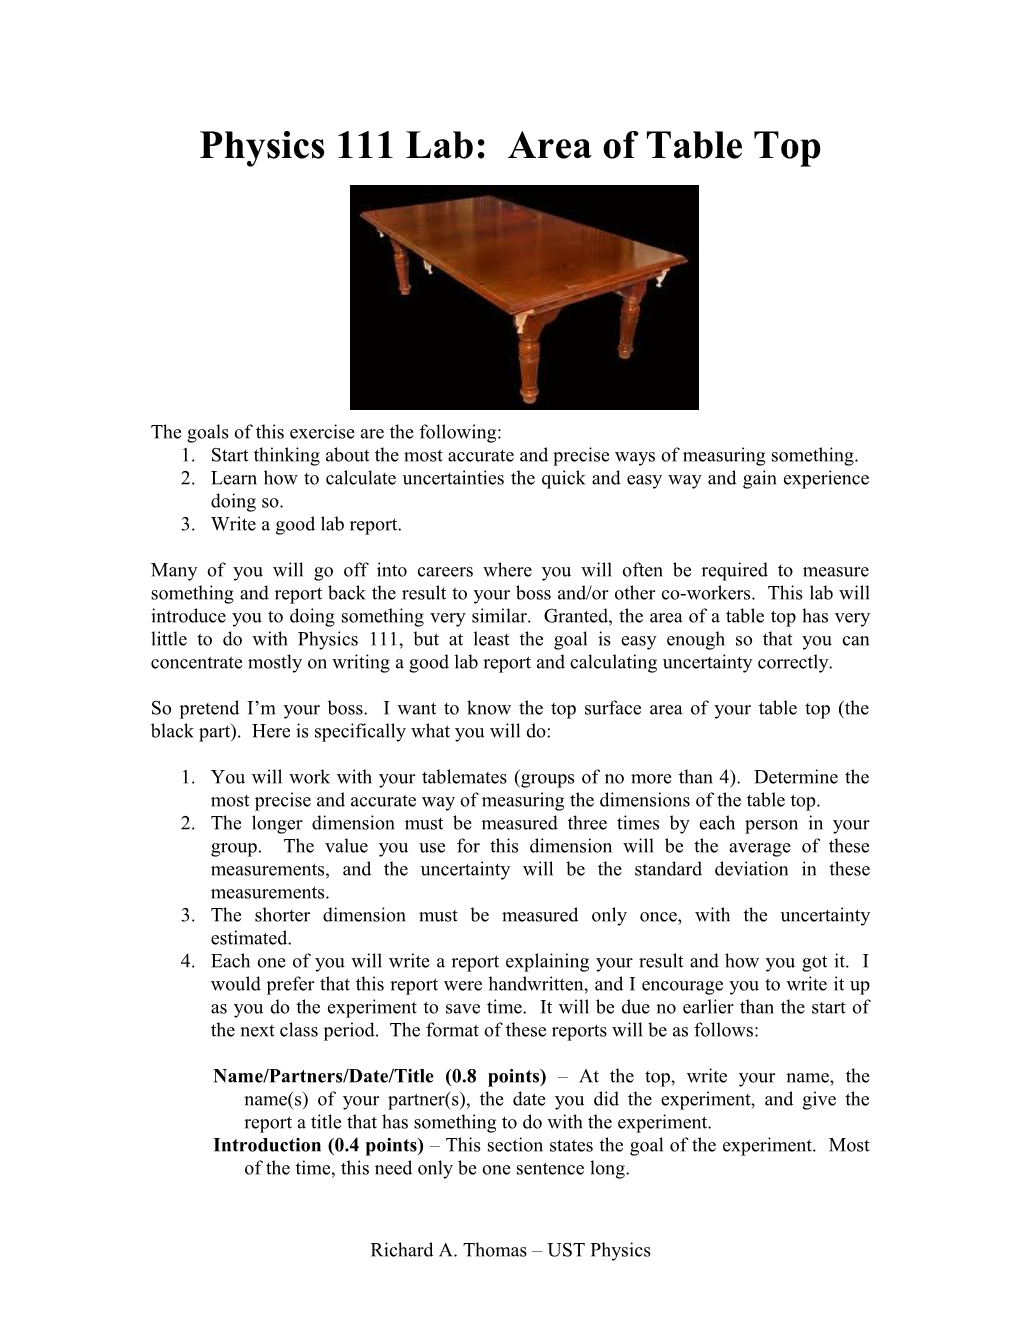 Physics 112 Lab: Volume of Table Top